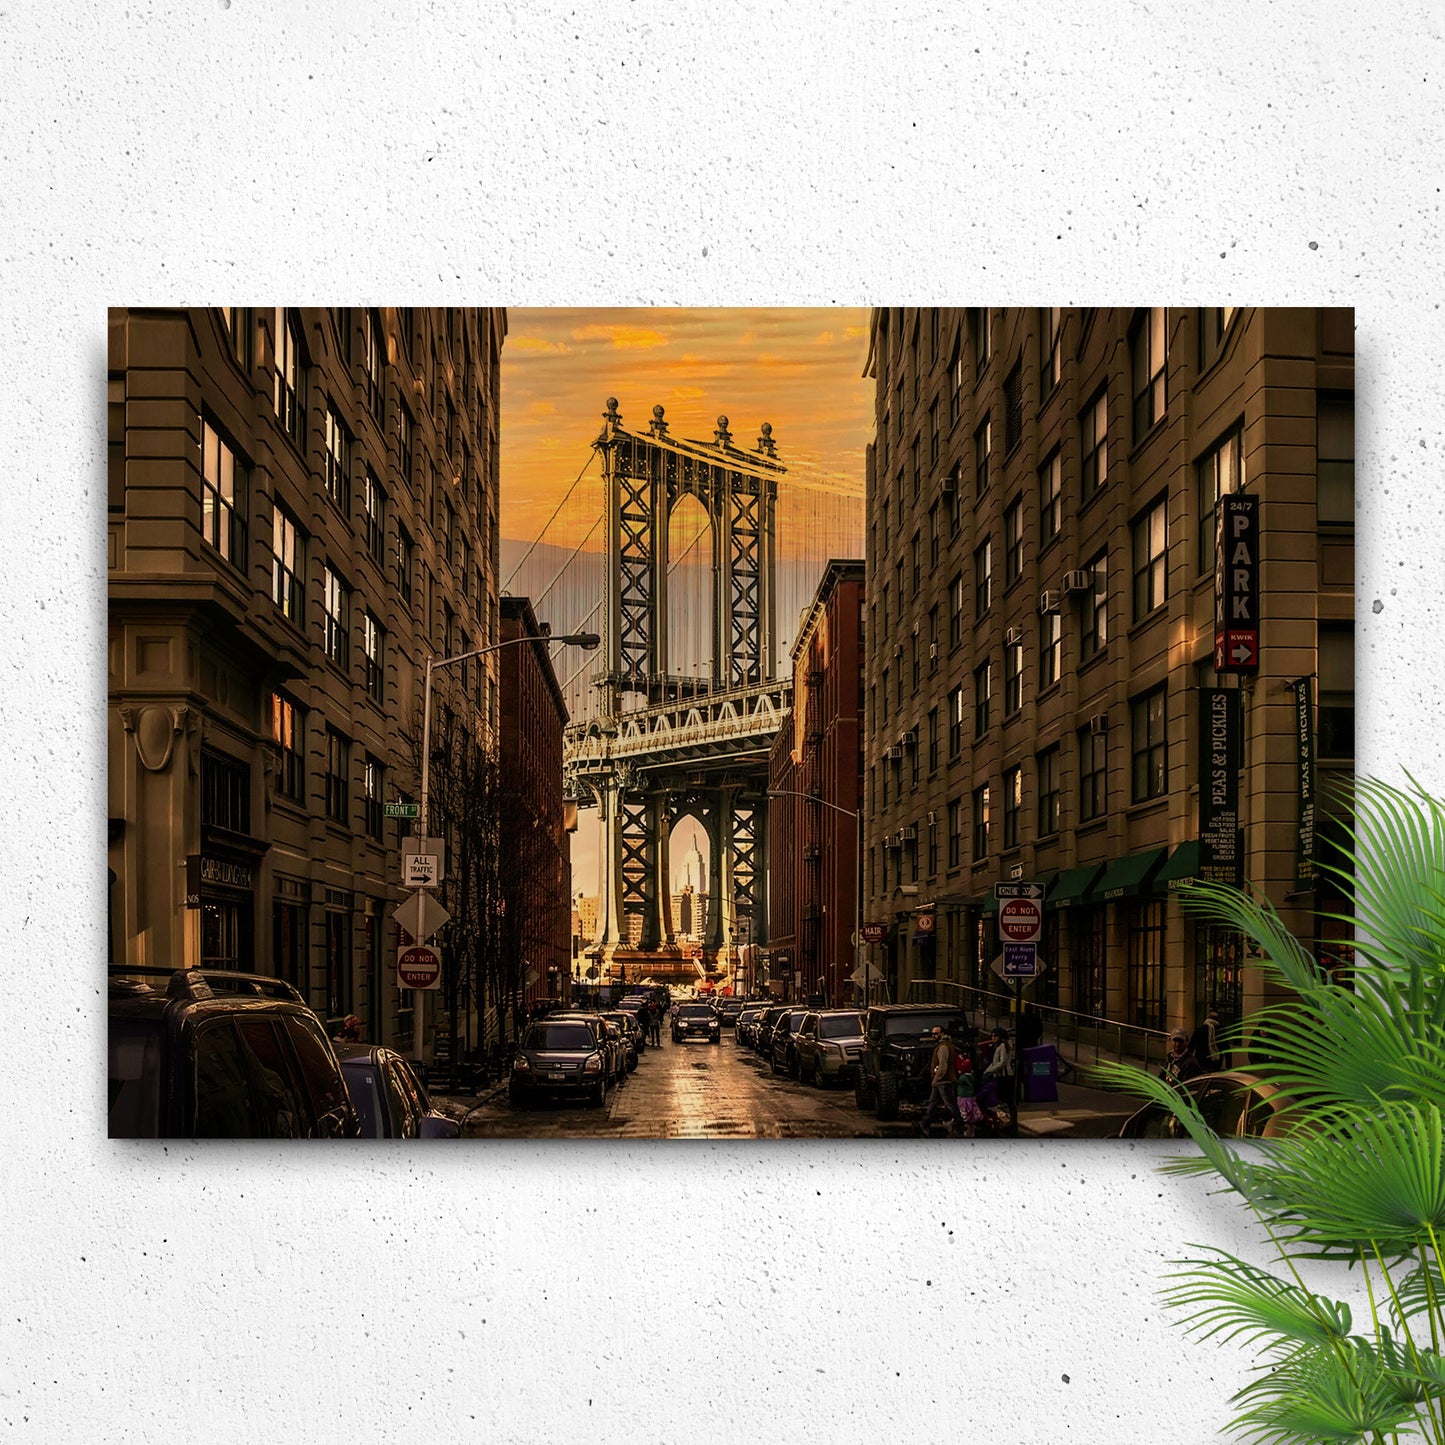 Glimpse Of Brooklyn Bridge Canvas Wall Art - Image by Tailored Canvases